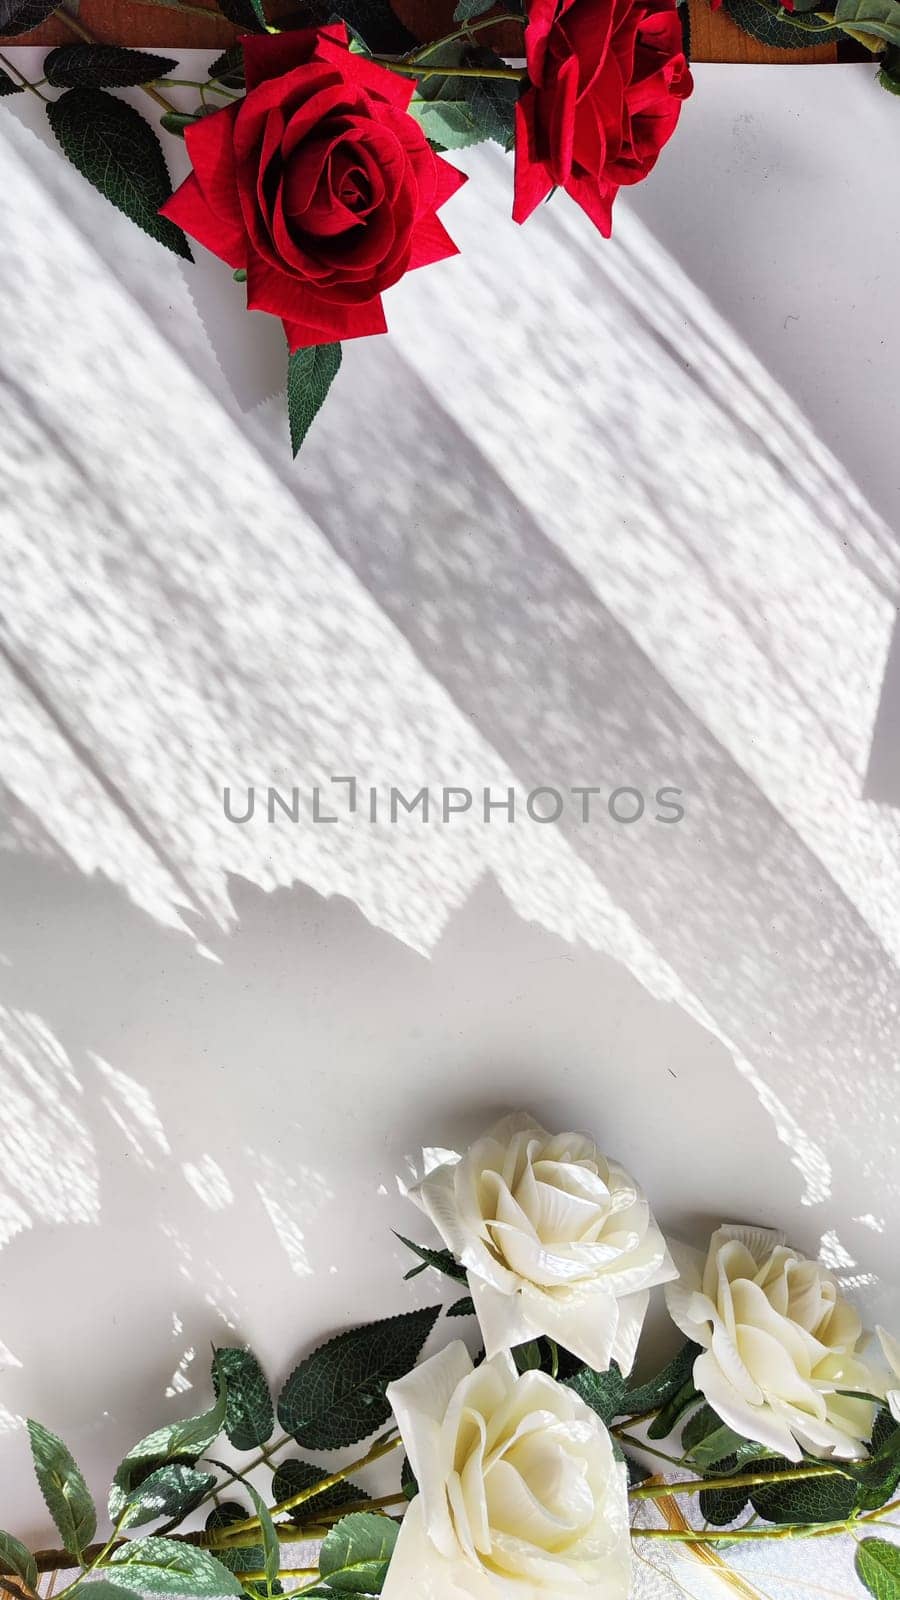 Background and texture with beautiful white and red roses with light and shadow from sun. Abstract cart with frame framed with roses, copy space and place for text. Concept of gifts, beauty, holiday